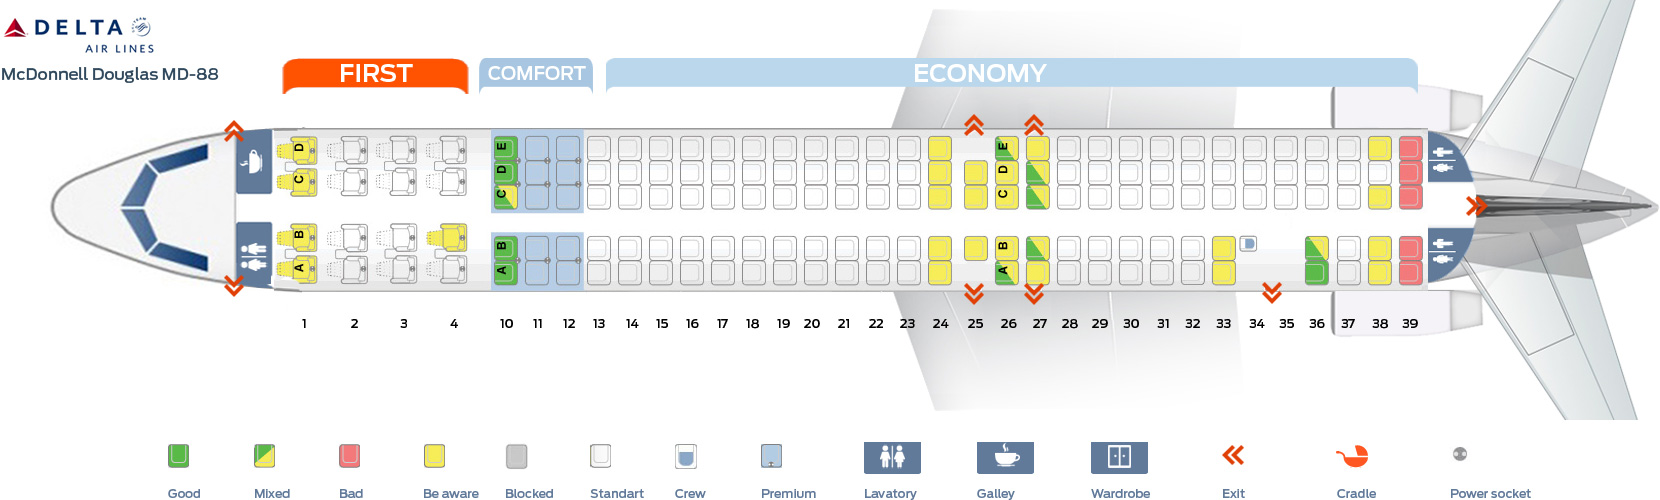 Seat_map_Delta_Airlines_MD_90 | Airlines and planes. Reviews and tips